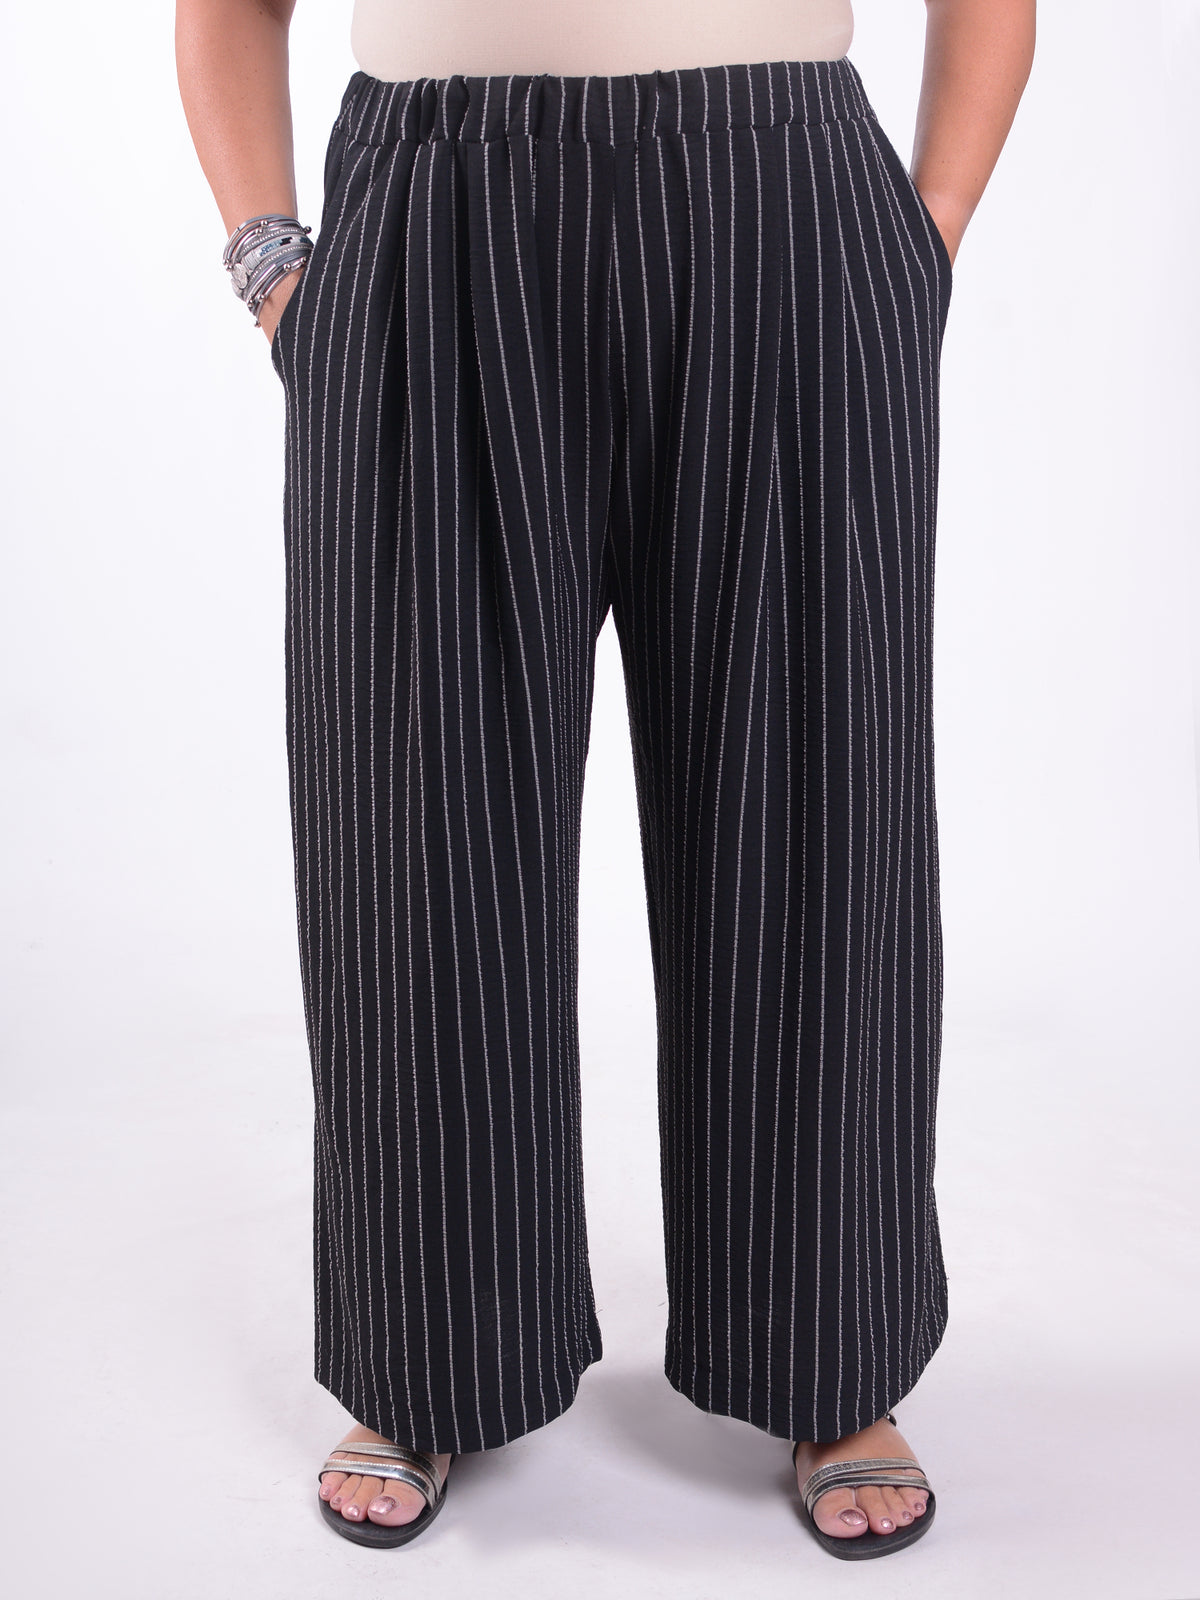 Lagenlook Wide Leg Trousers - 2257, Trousers, Pure Plus Clothing, Lagenlook Clothing, Plus Size Fashion, Over 50 Fashion